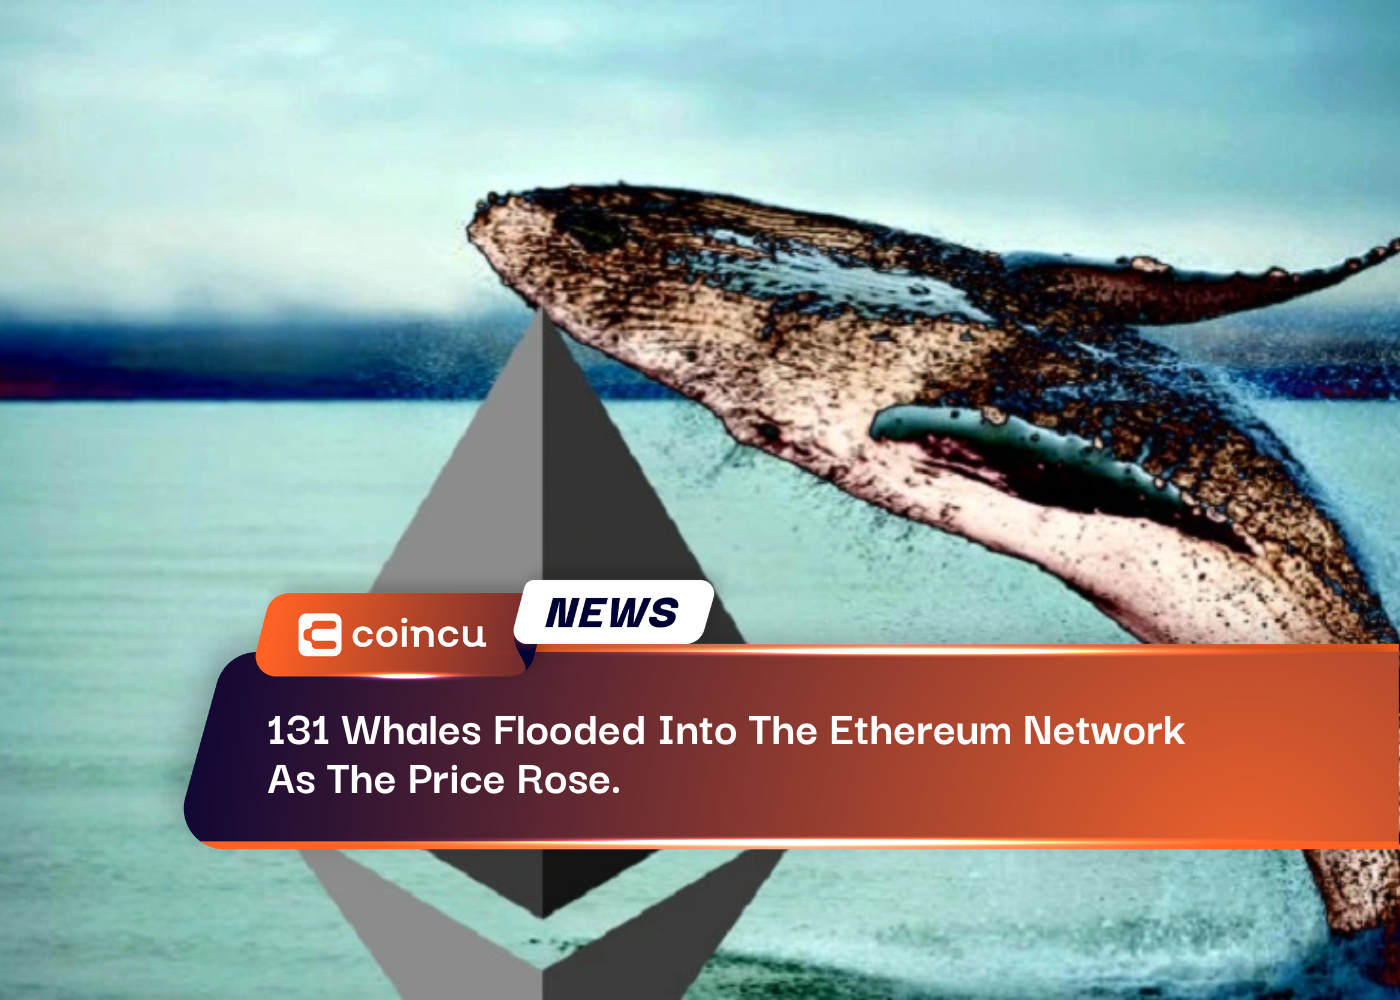 131 Whales Flooded Into The Ethereum Network As The Price Rose.